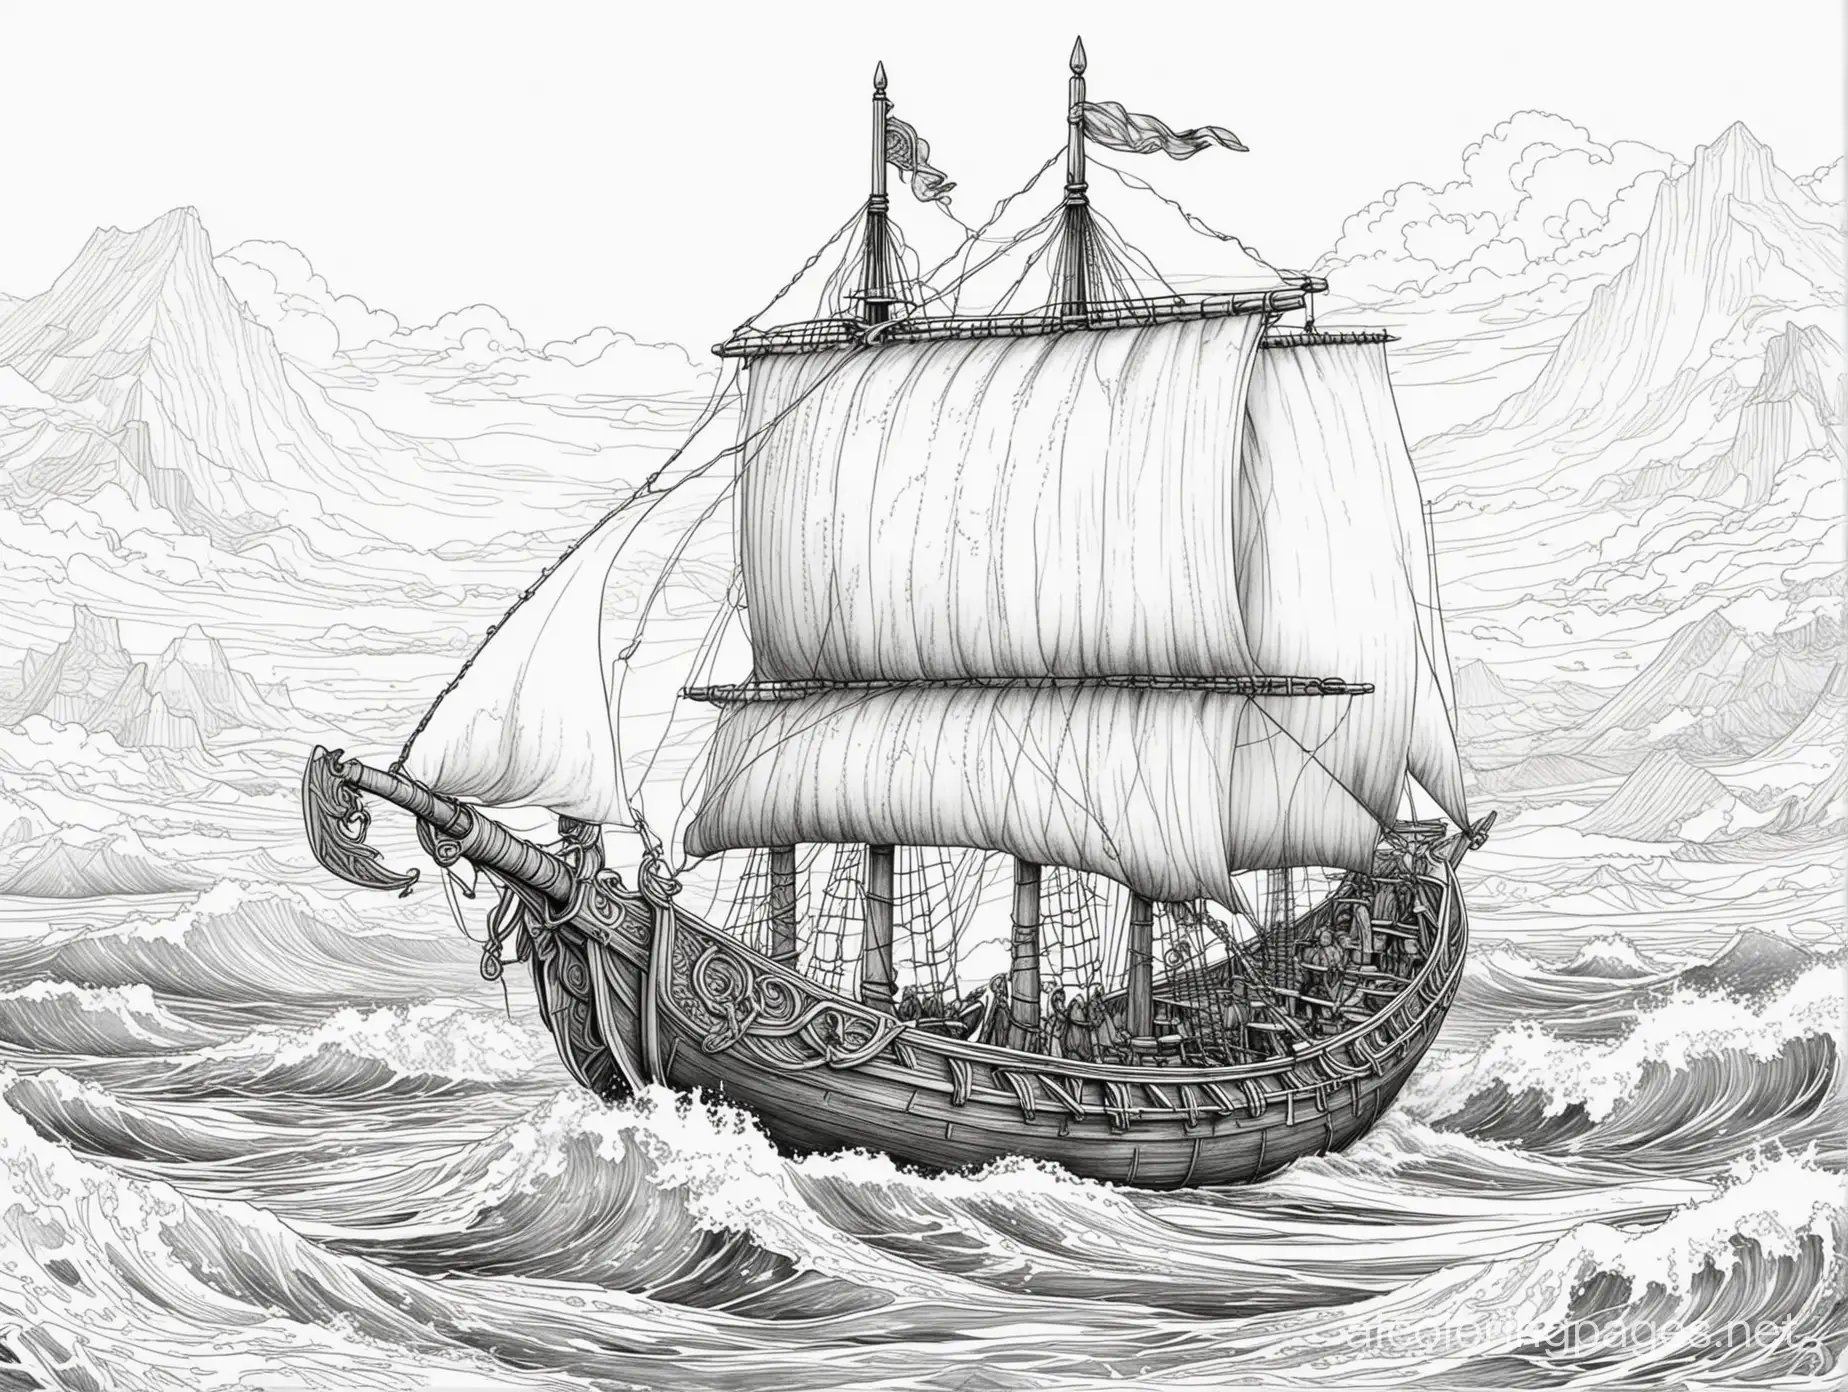 Viking longship sailing on stormy seas, Coloring Page, black and white, line art, white background, Simplicity, Ample White Space. The background of the coloring page is plain white to make it easy for young children to color within the lines. The outlines of all the subjects are easy to distinguish, making it simple for kids to color without too much difficulty